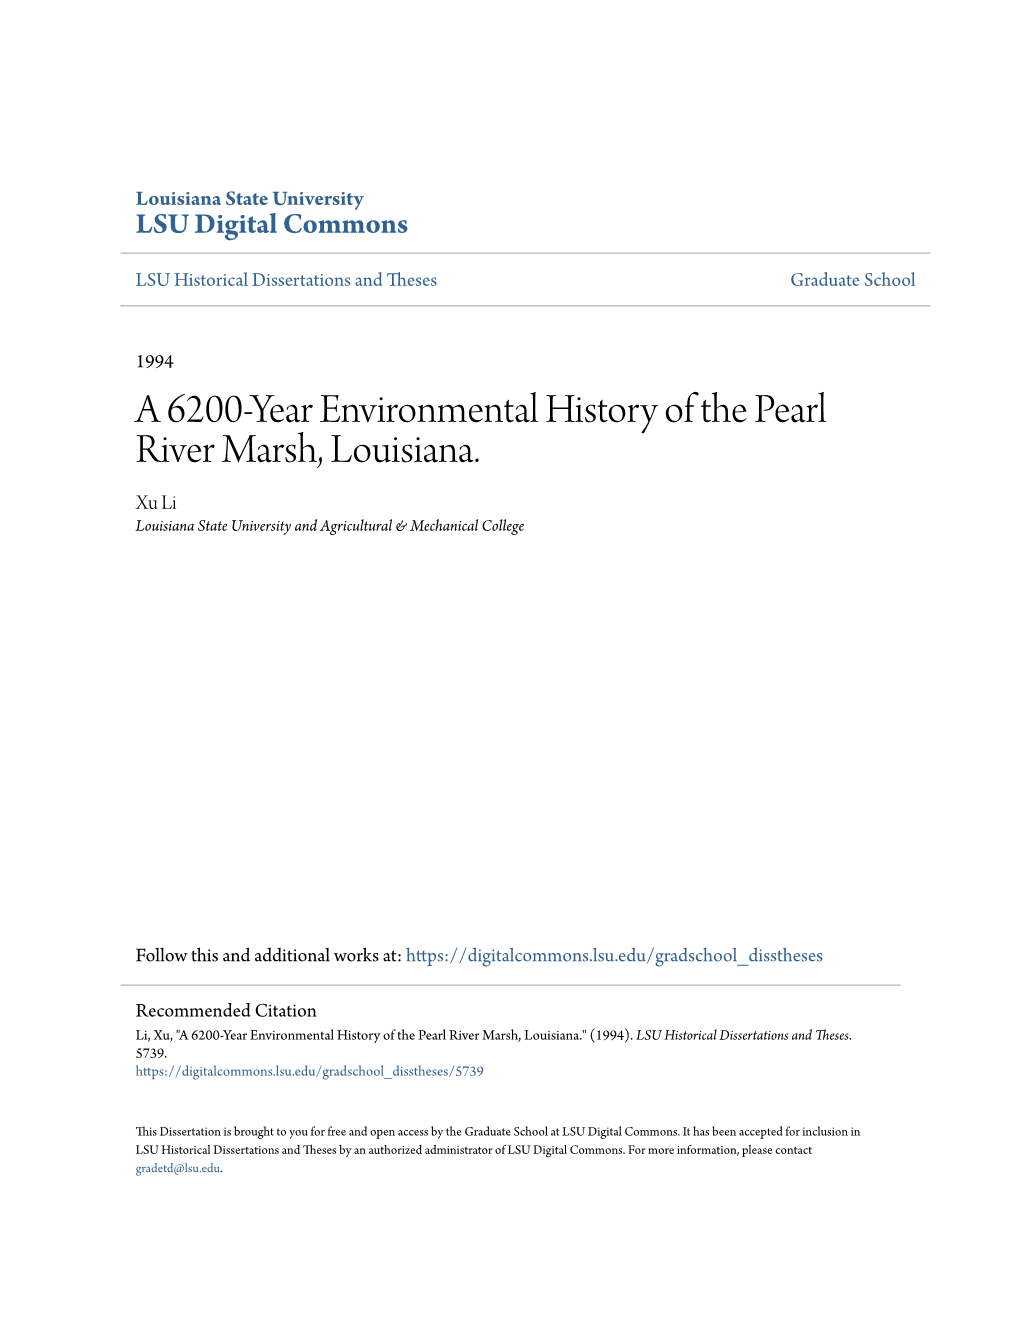 A 6200-Year Environmental History of the Pearl River Marsh, Louisiana. Xu Li Louisiana State University and Agricultural & Mechanical College